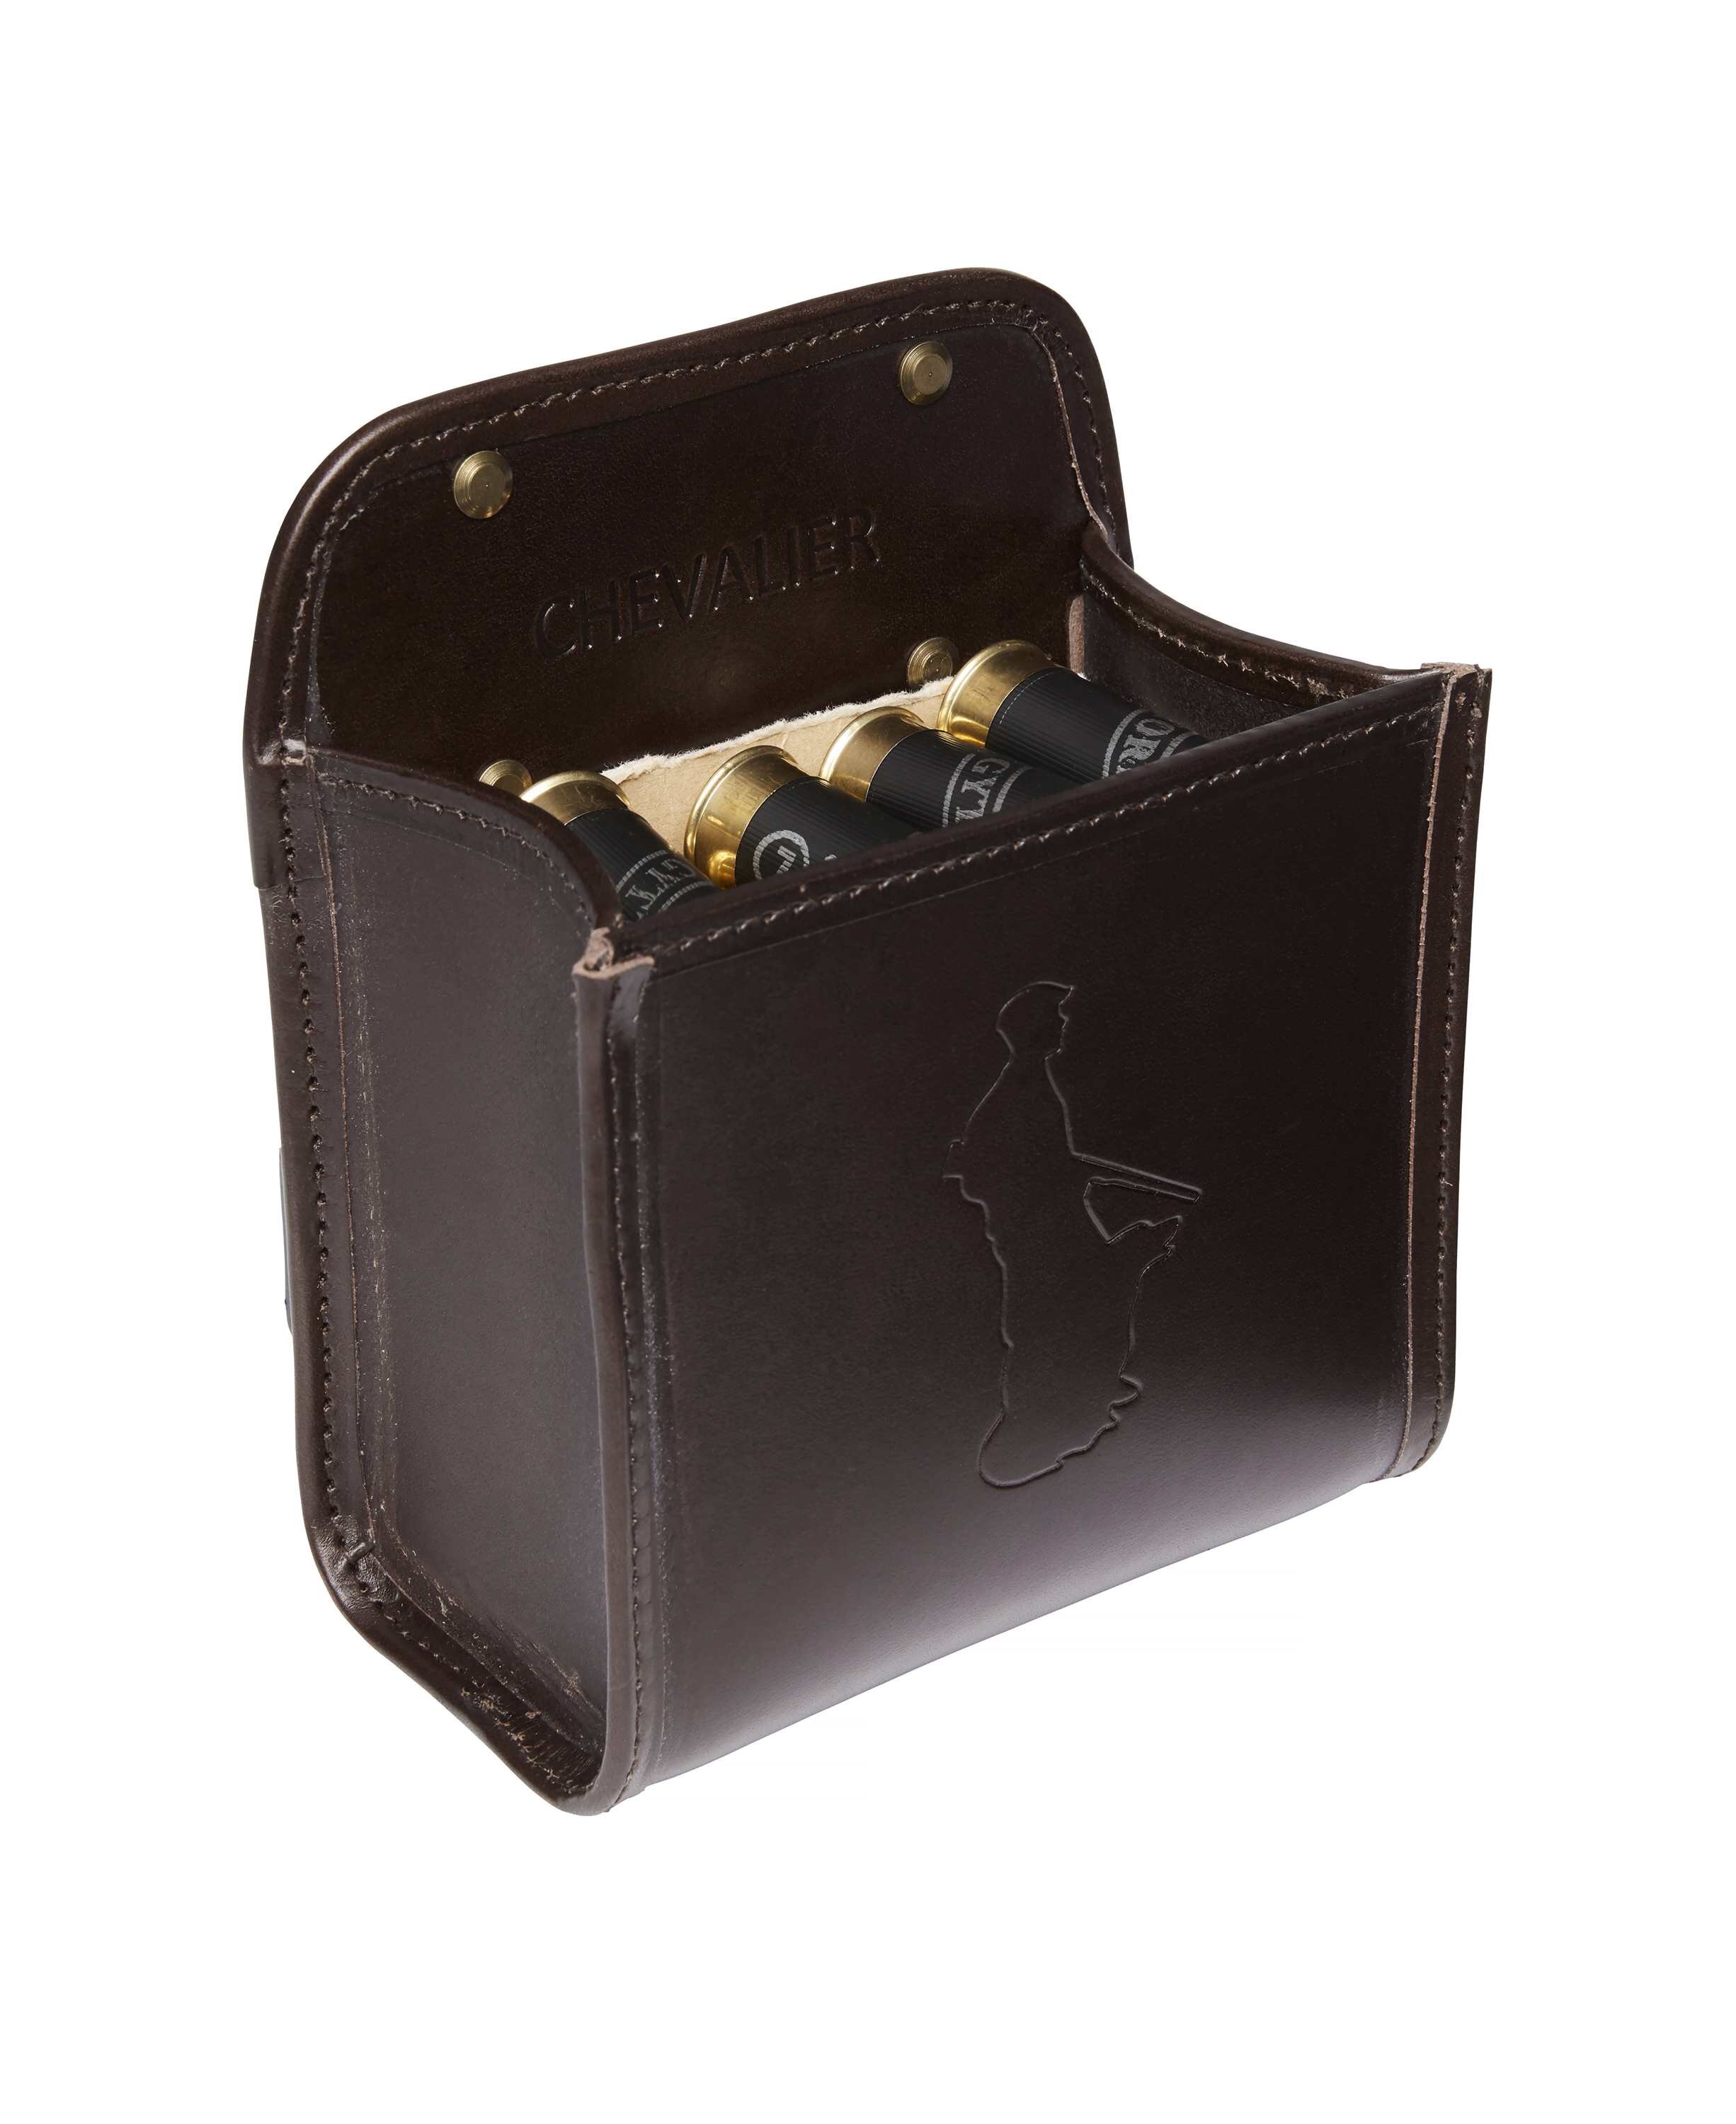 Iver Leather Cartridge Bag